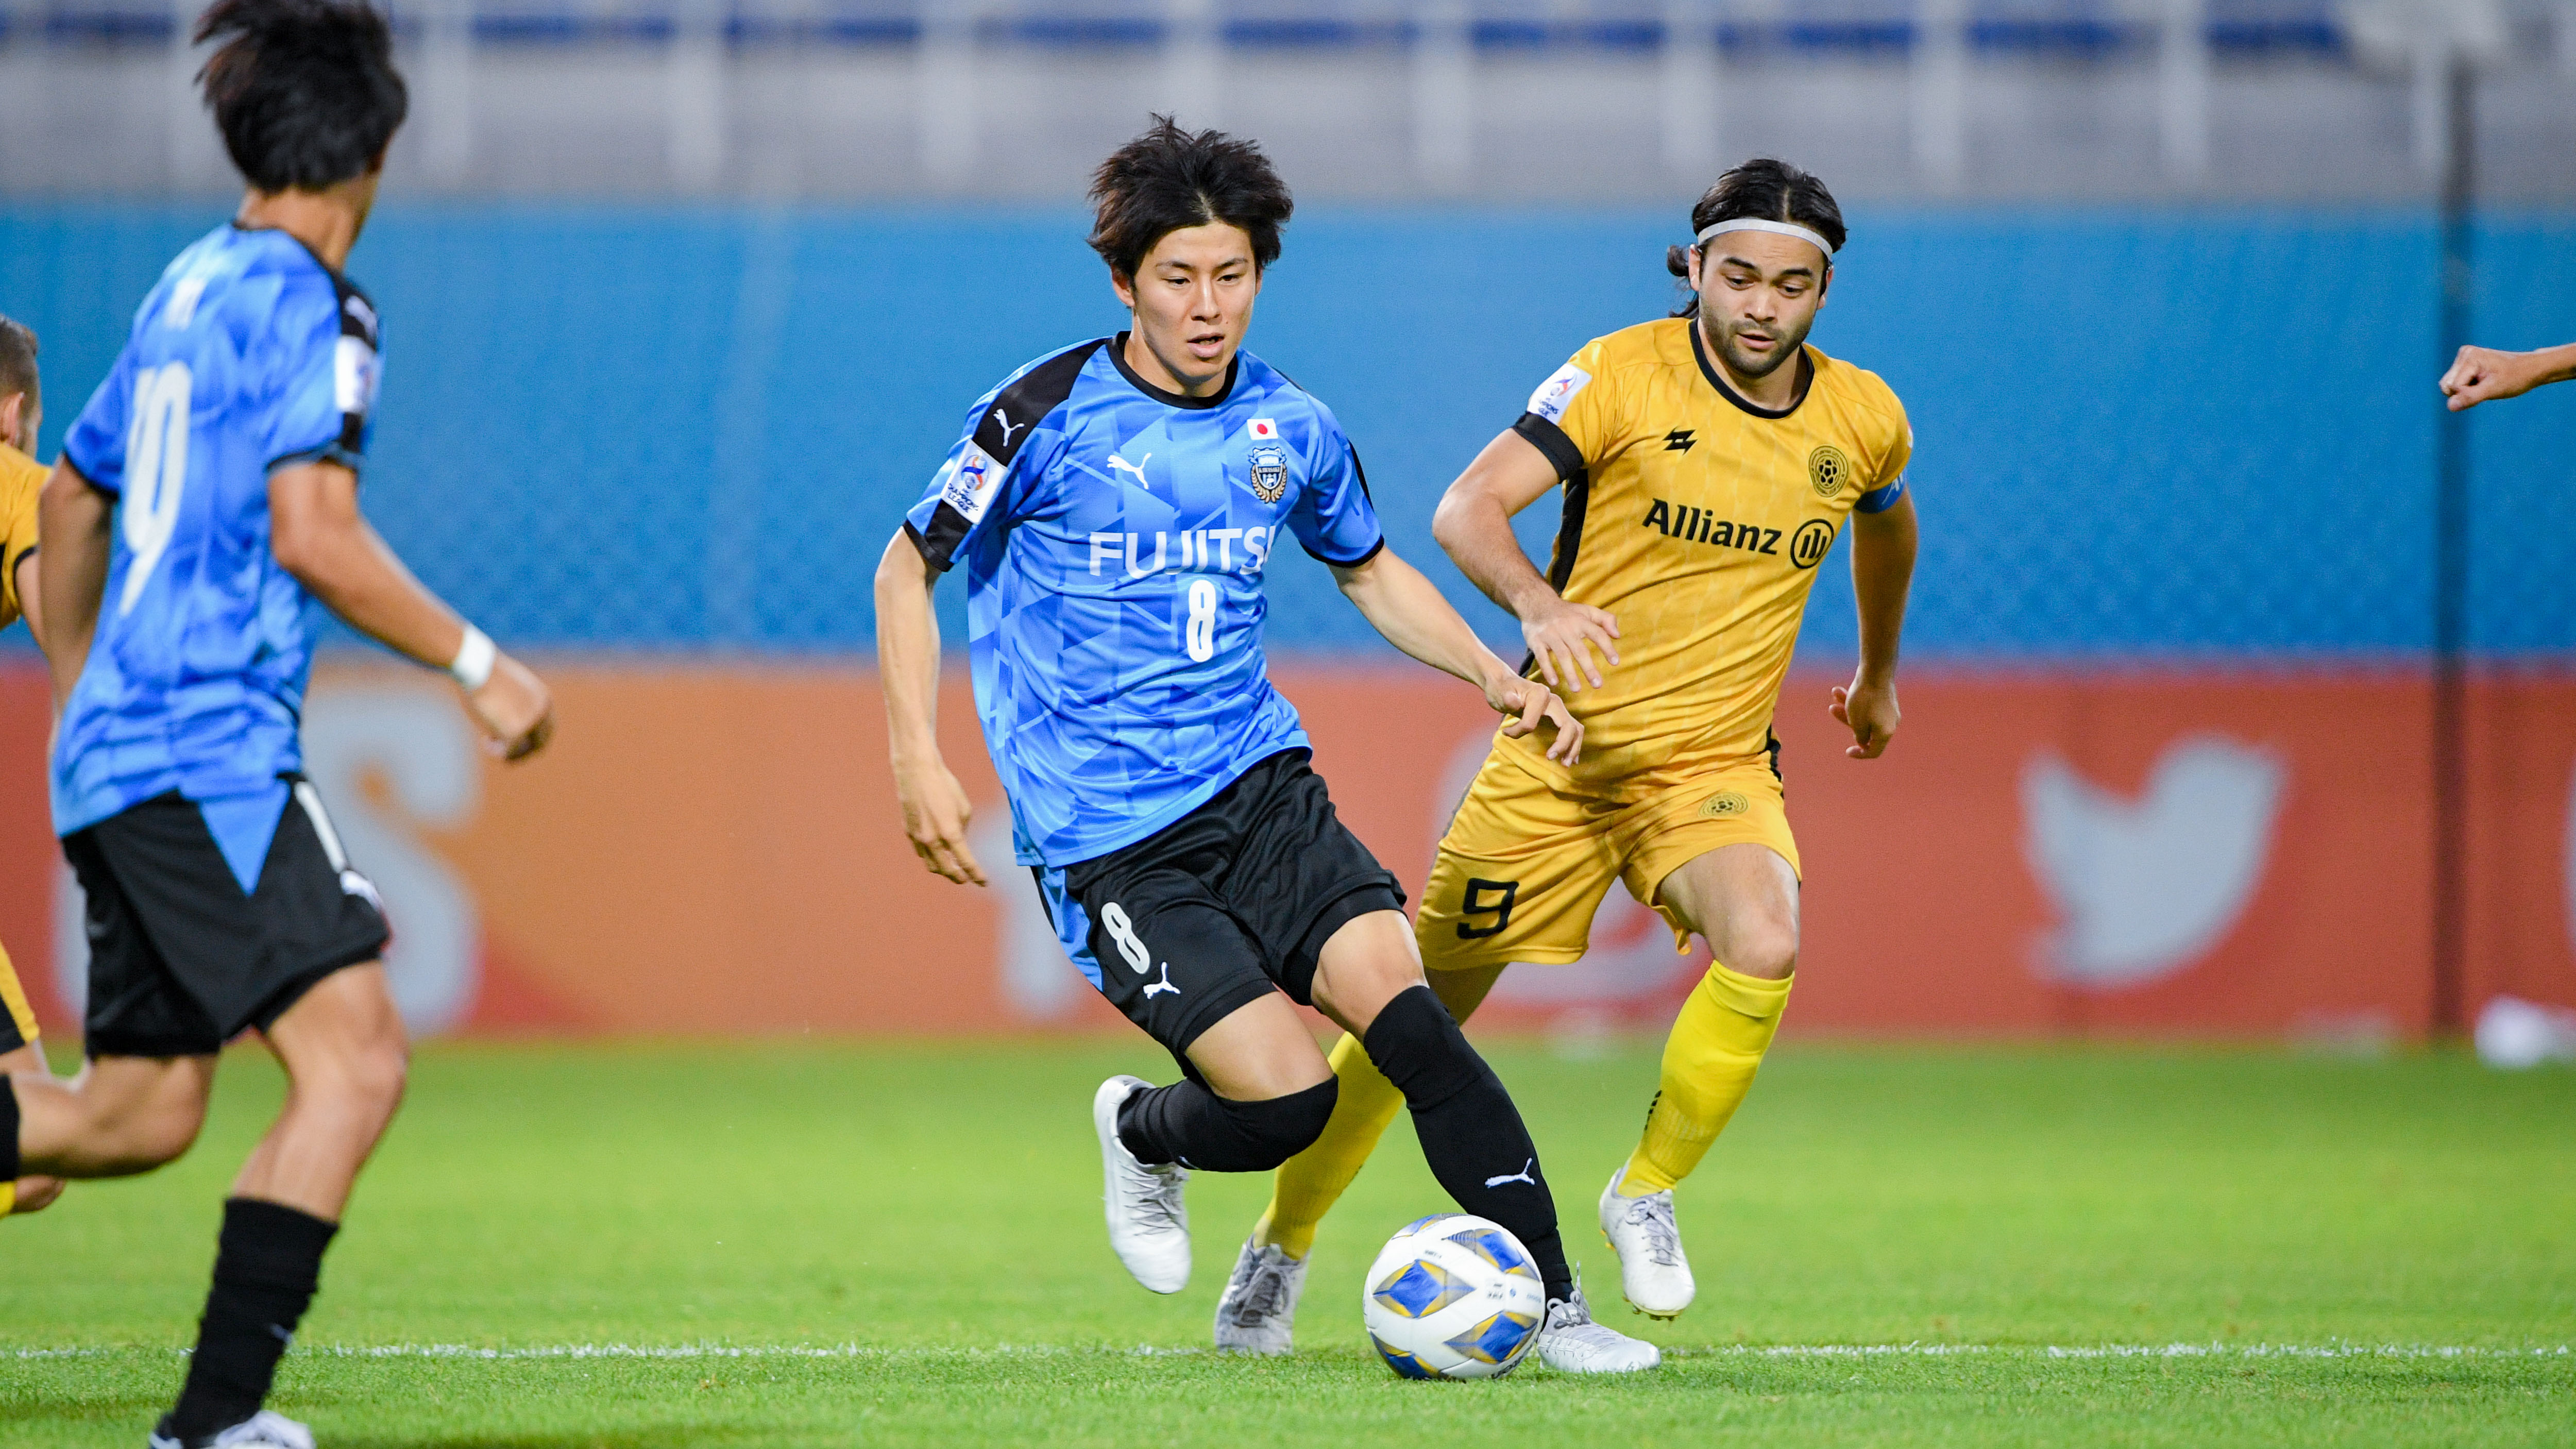 Acl21 United City Fc 0 2 Kawasaki Frontale The Philippine Football Federation